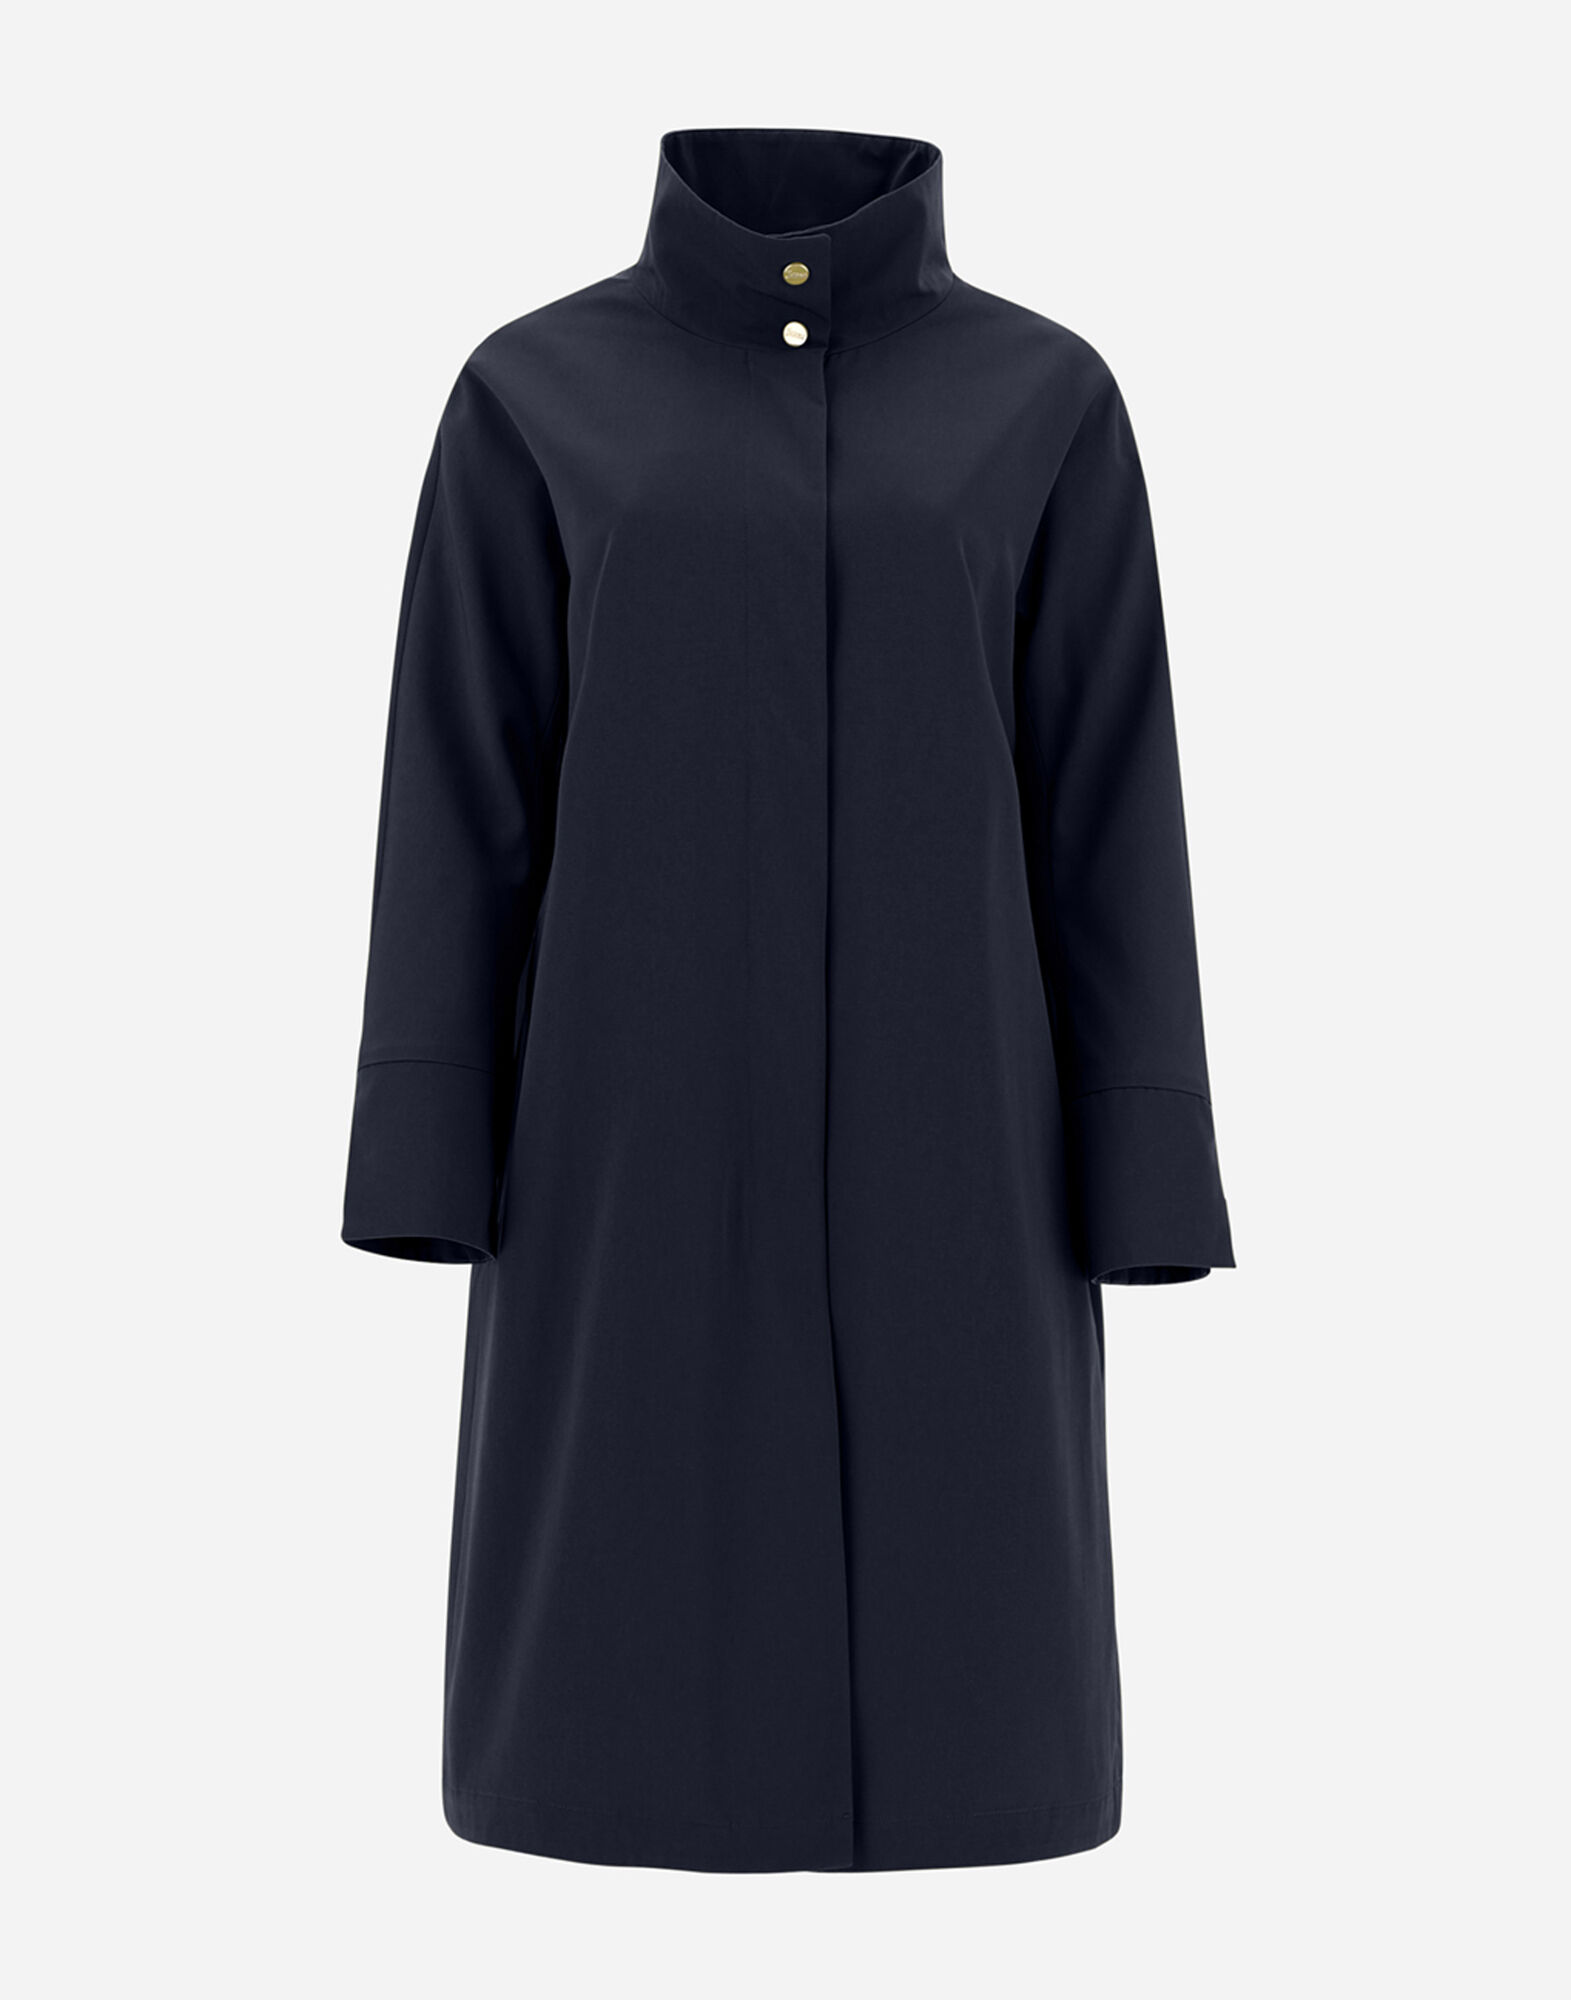 NEW TECHNO SHANTUNG COAT in Blue for Women | Herno®